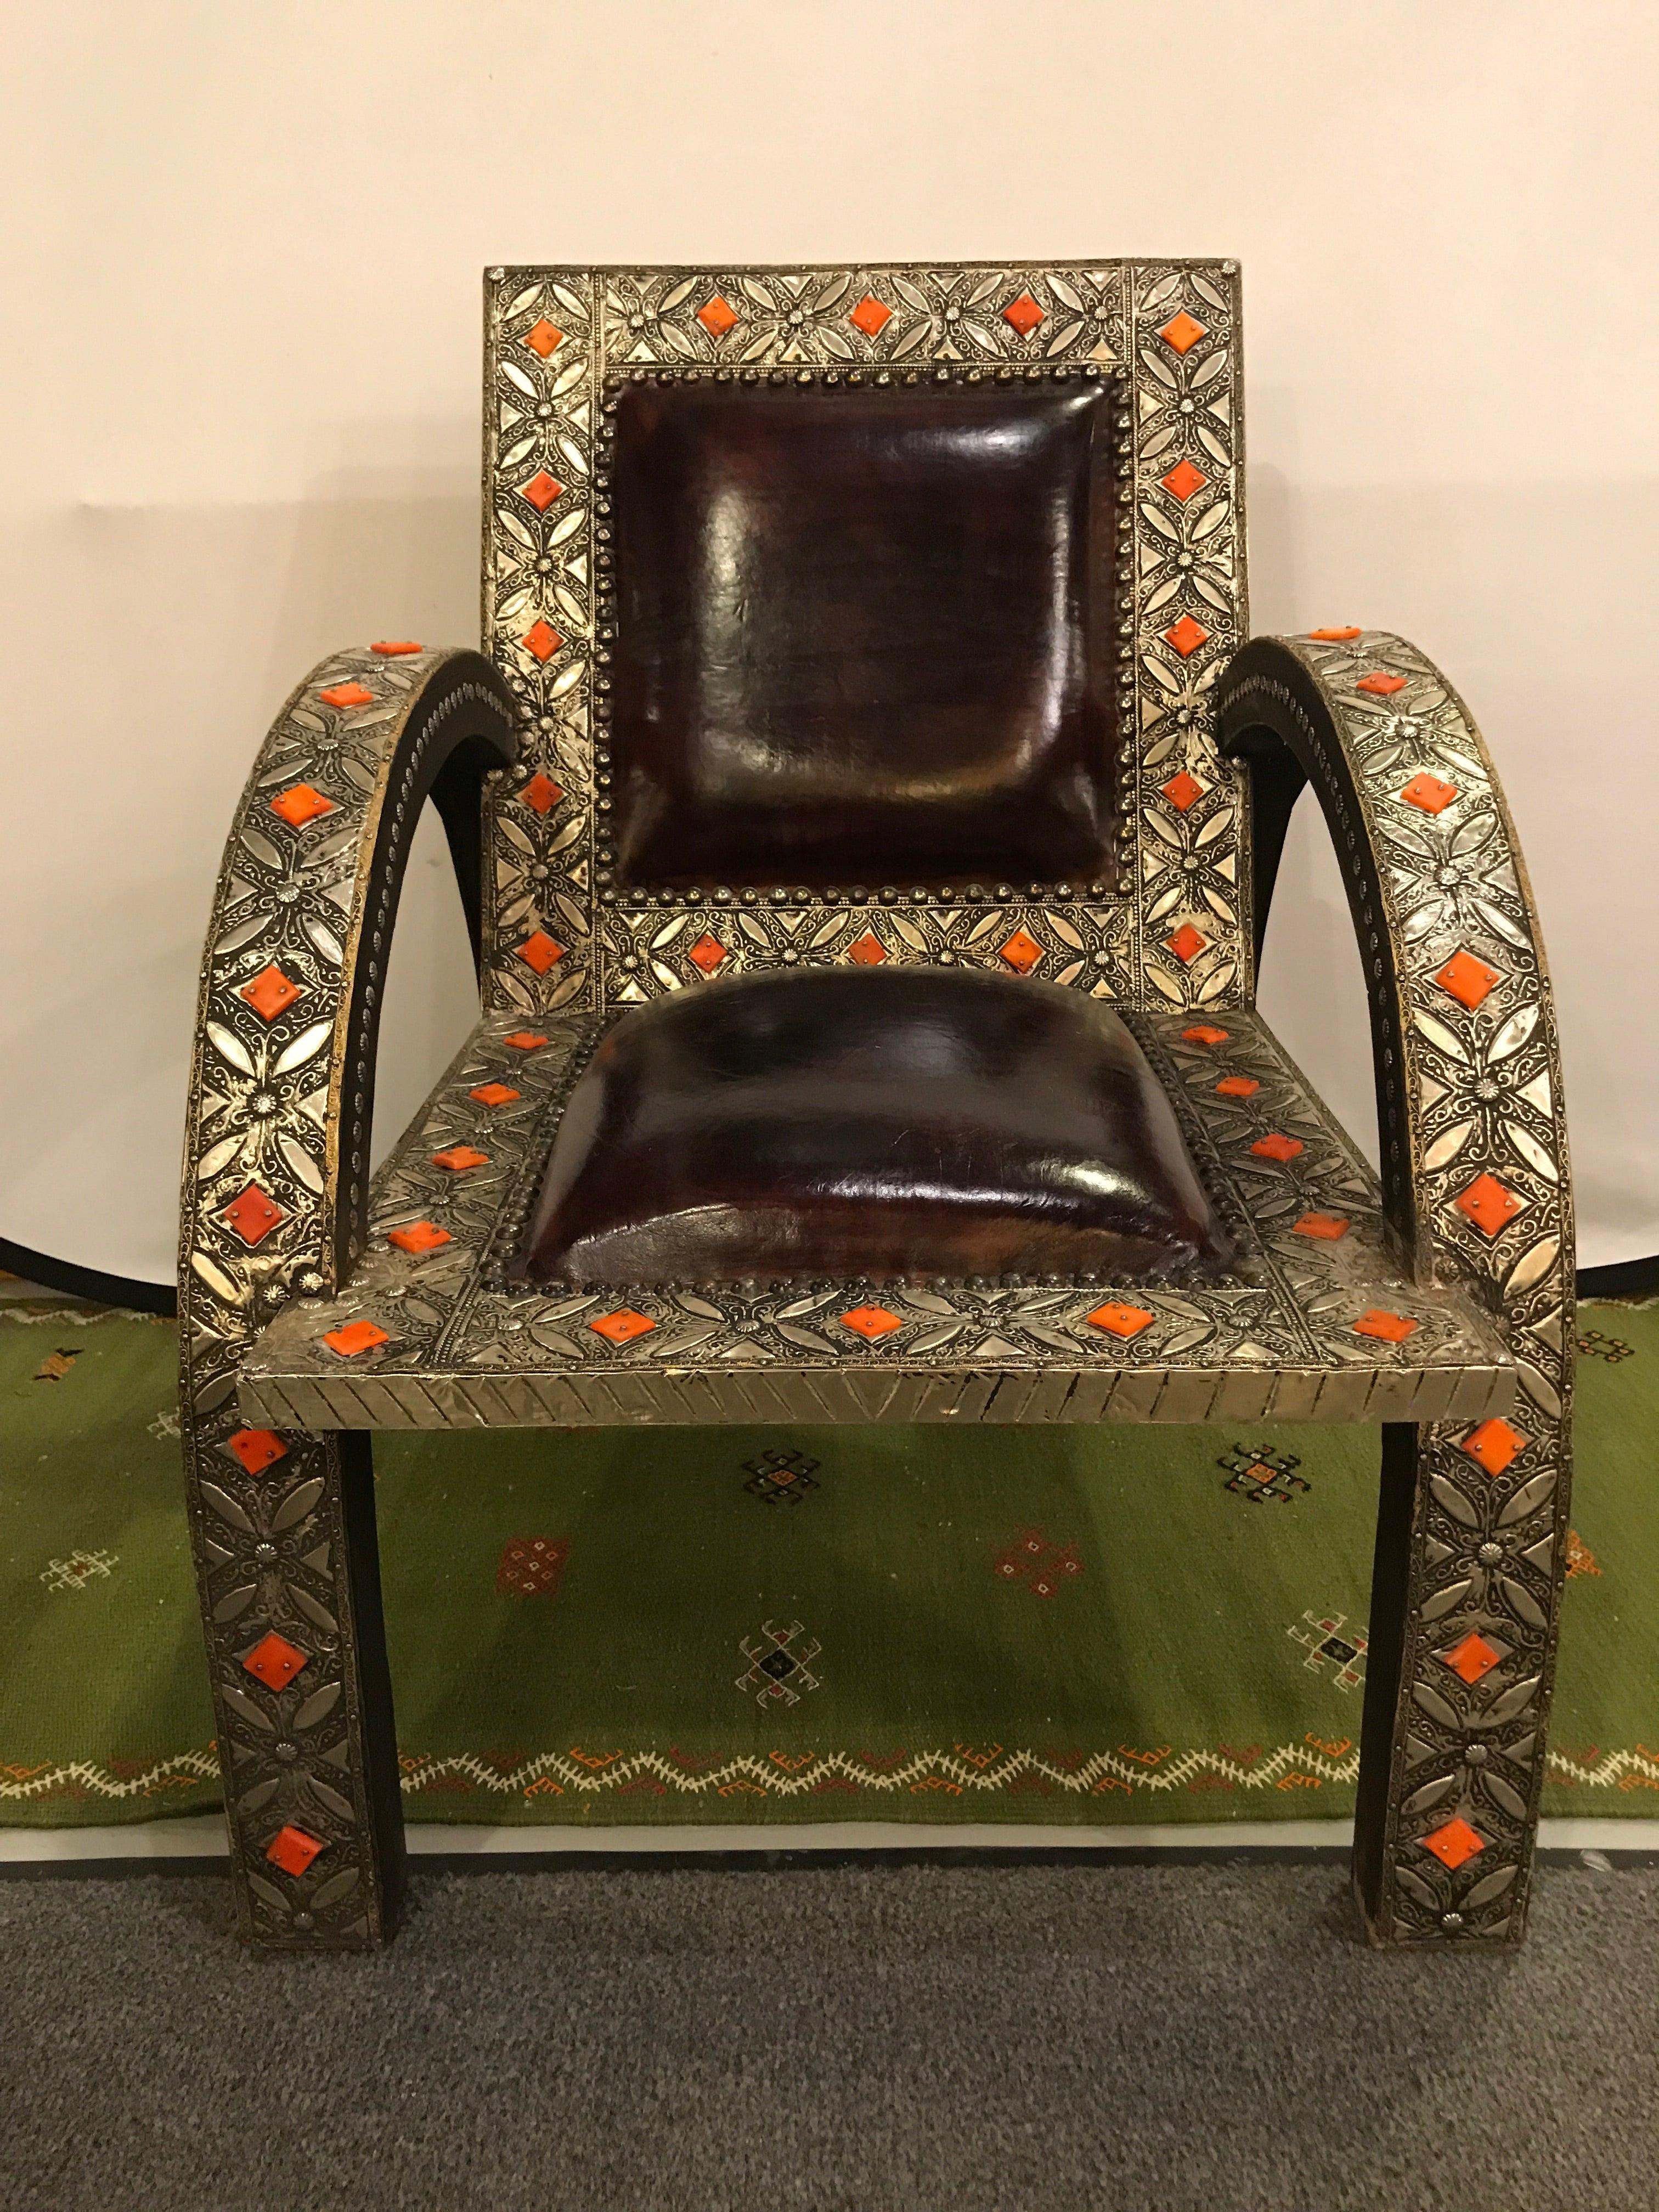 Moroccan Armchair Royal Style Camel Bone, Leather and Brass Inlay